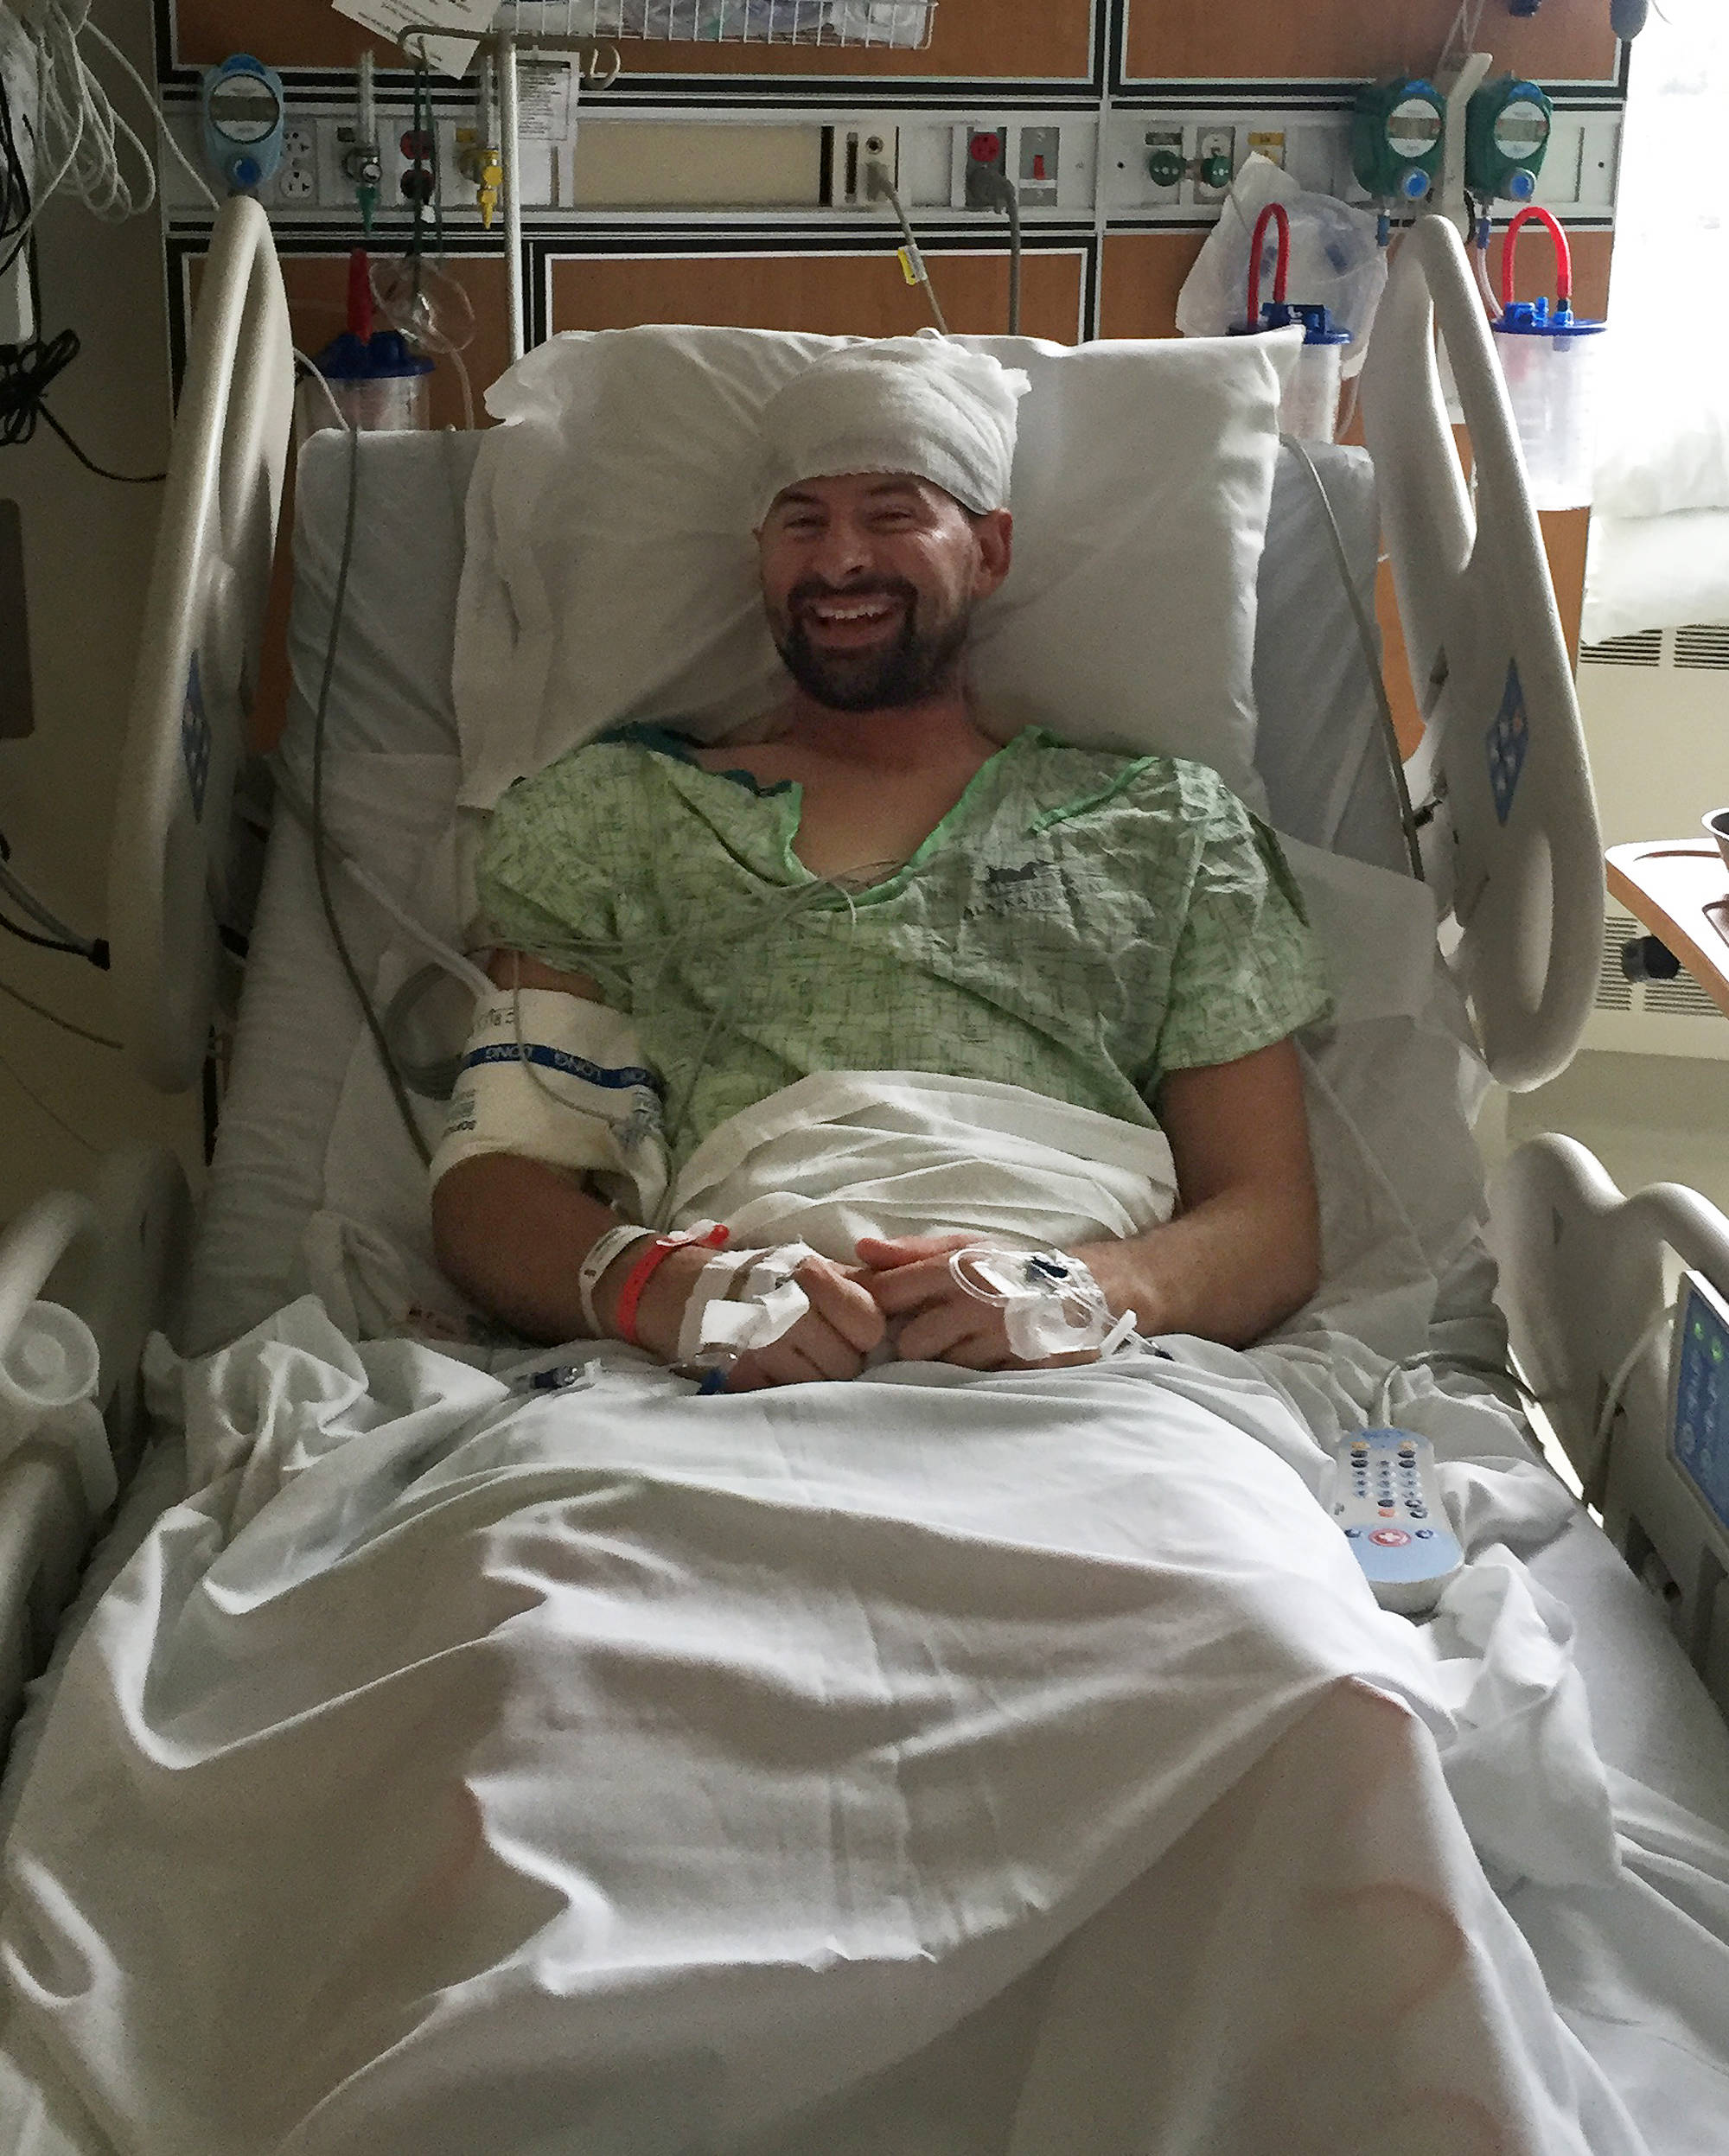 Nikiski firefighter Levi Doss reveals a smile while recovering from brain surgery in Anchorage in 2016. (Photo provided by Tera Doss)